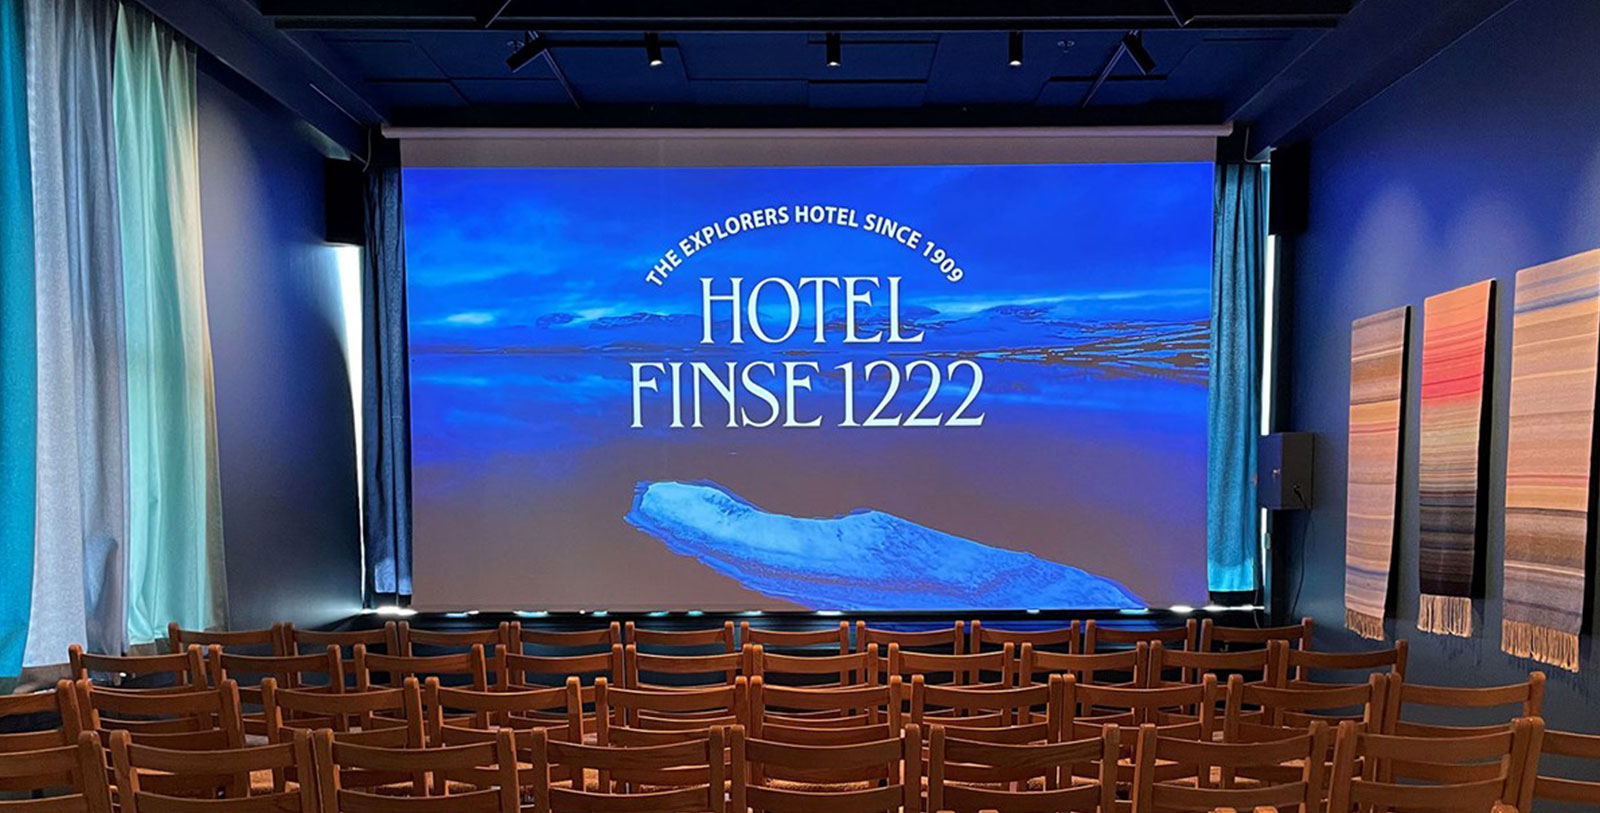 Image of Conference Space in Hotel Finse 1222, Norway, Request For Proposal